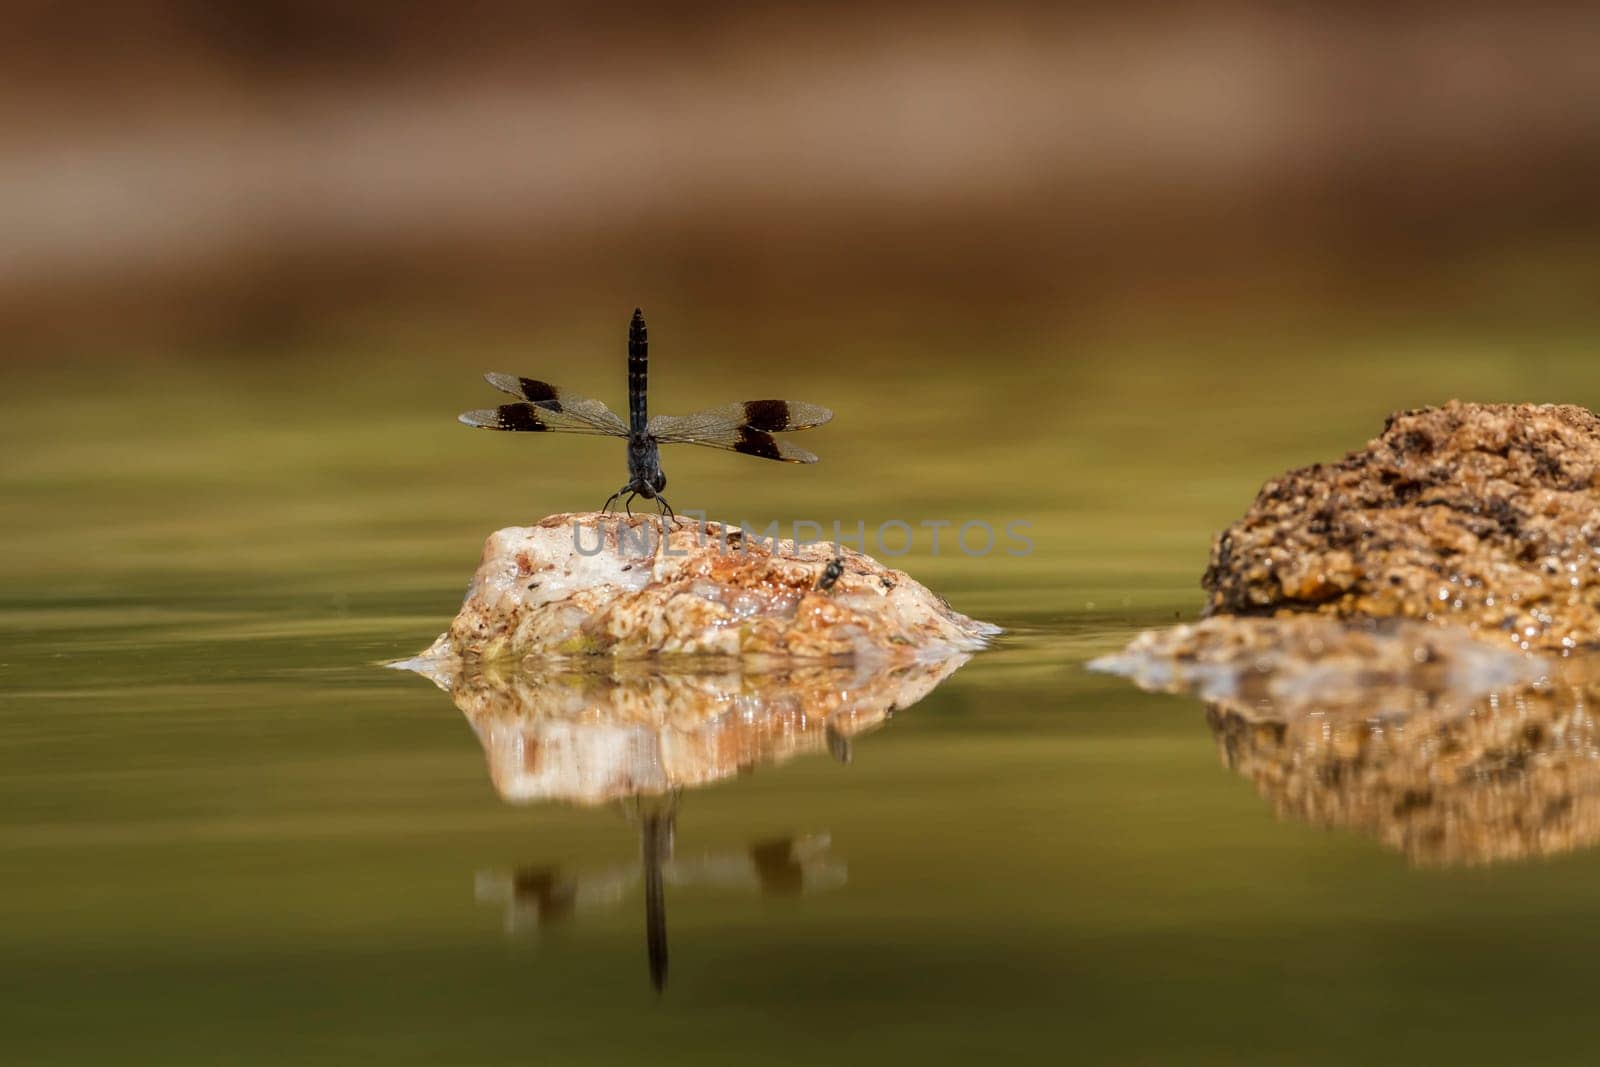 Dragonfly in Kruger National park, South Africa by PACOCOMO